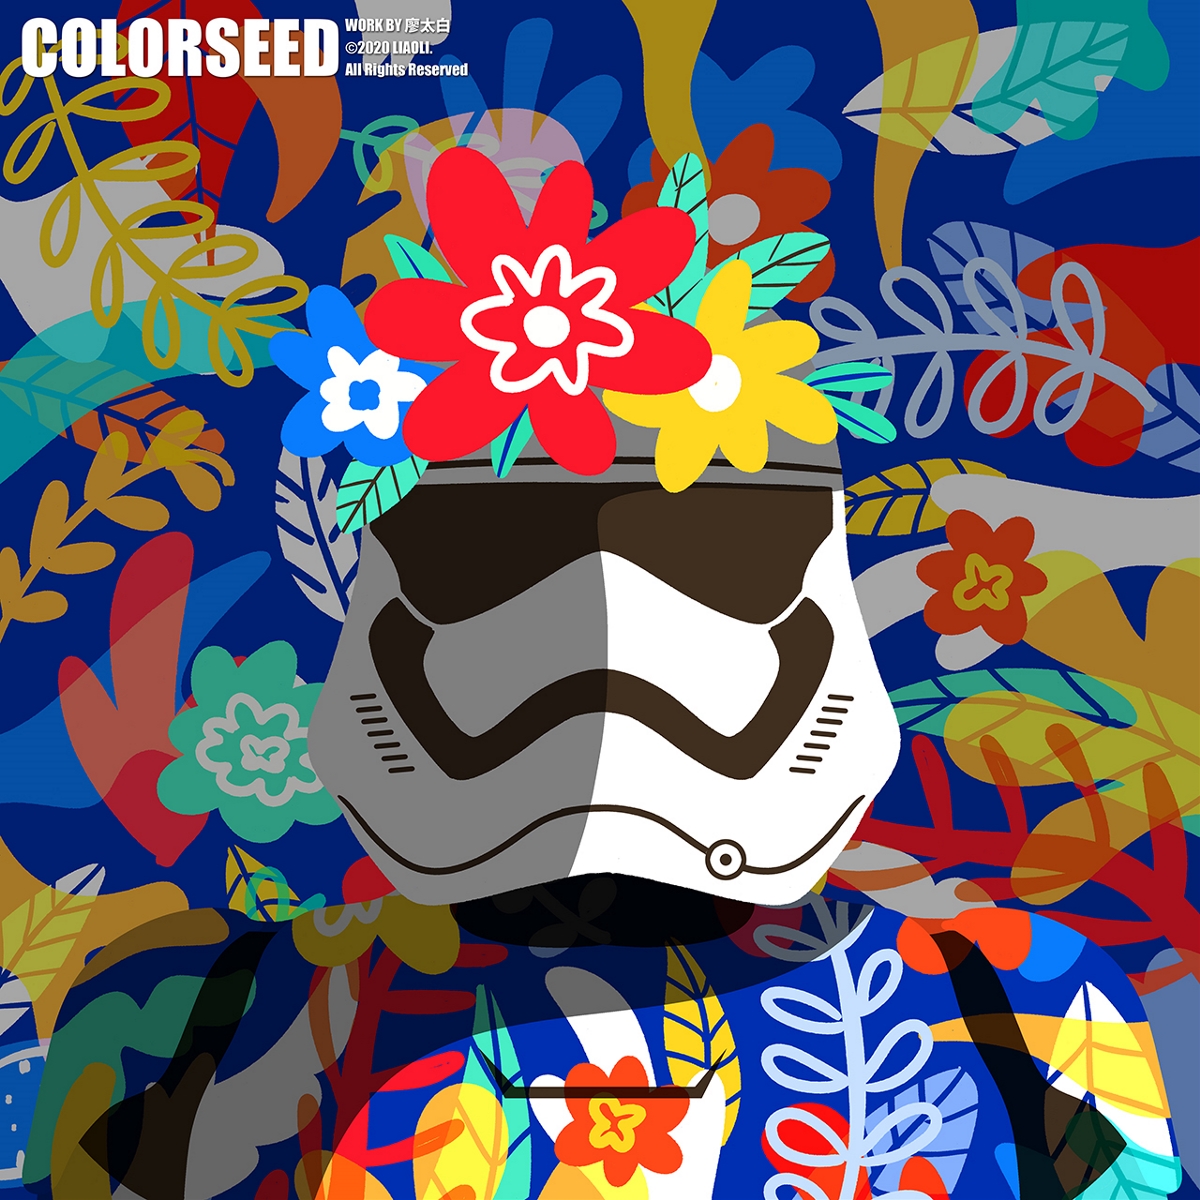 ColorSeed